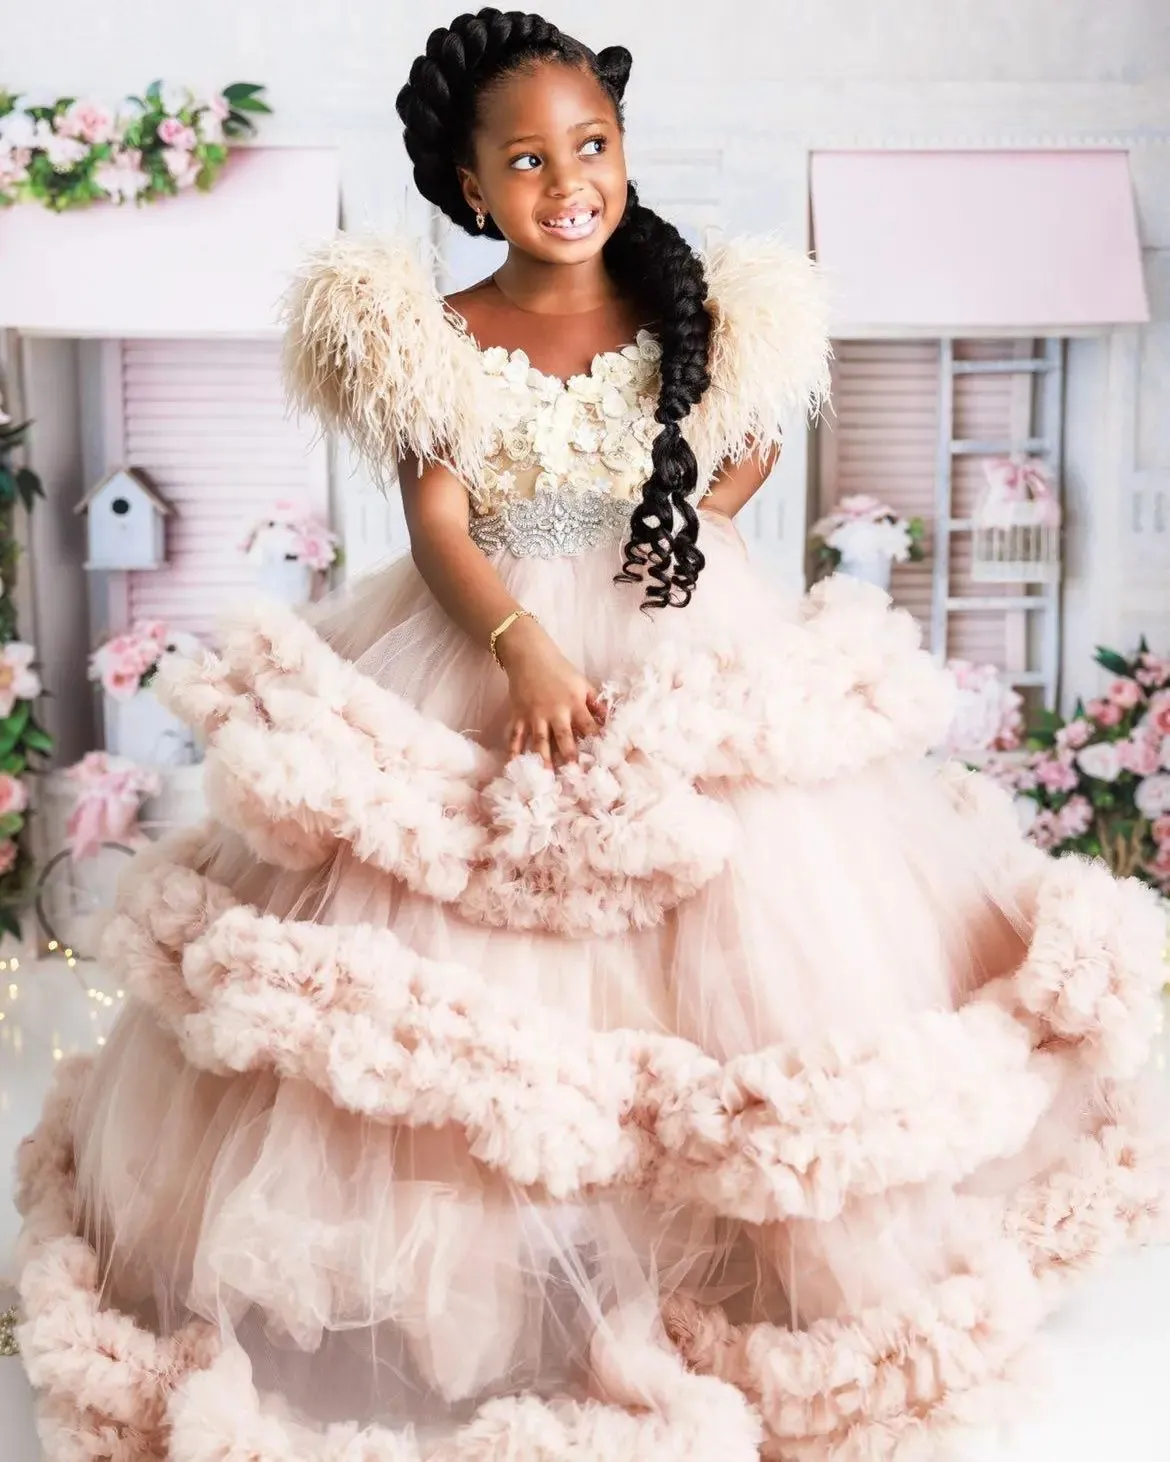 Blush Pink Feahter Girl Pageant Dressed Tiered Flower Girls jurken For Wedding Kids Ruffles Party Birthday Jurets For Photoshoot